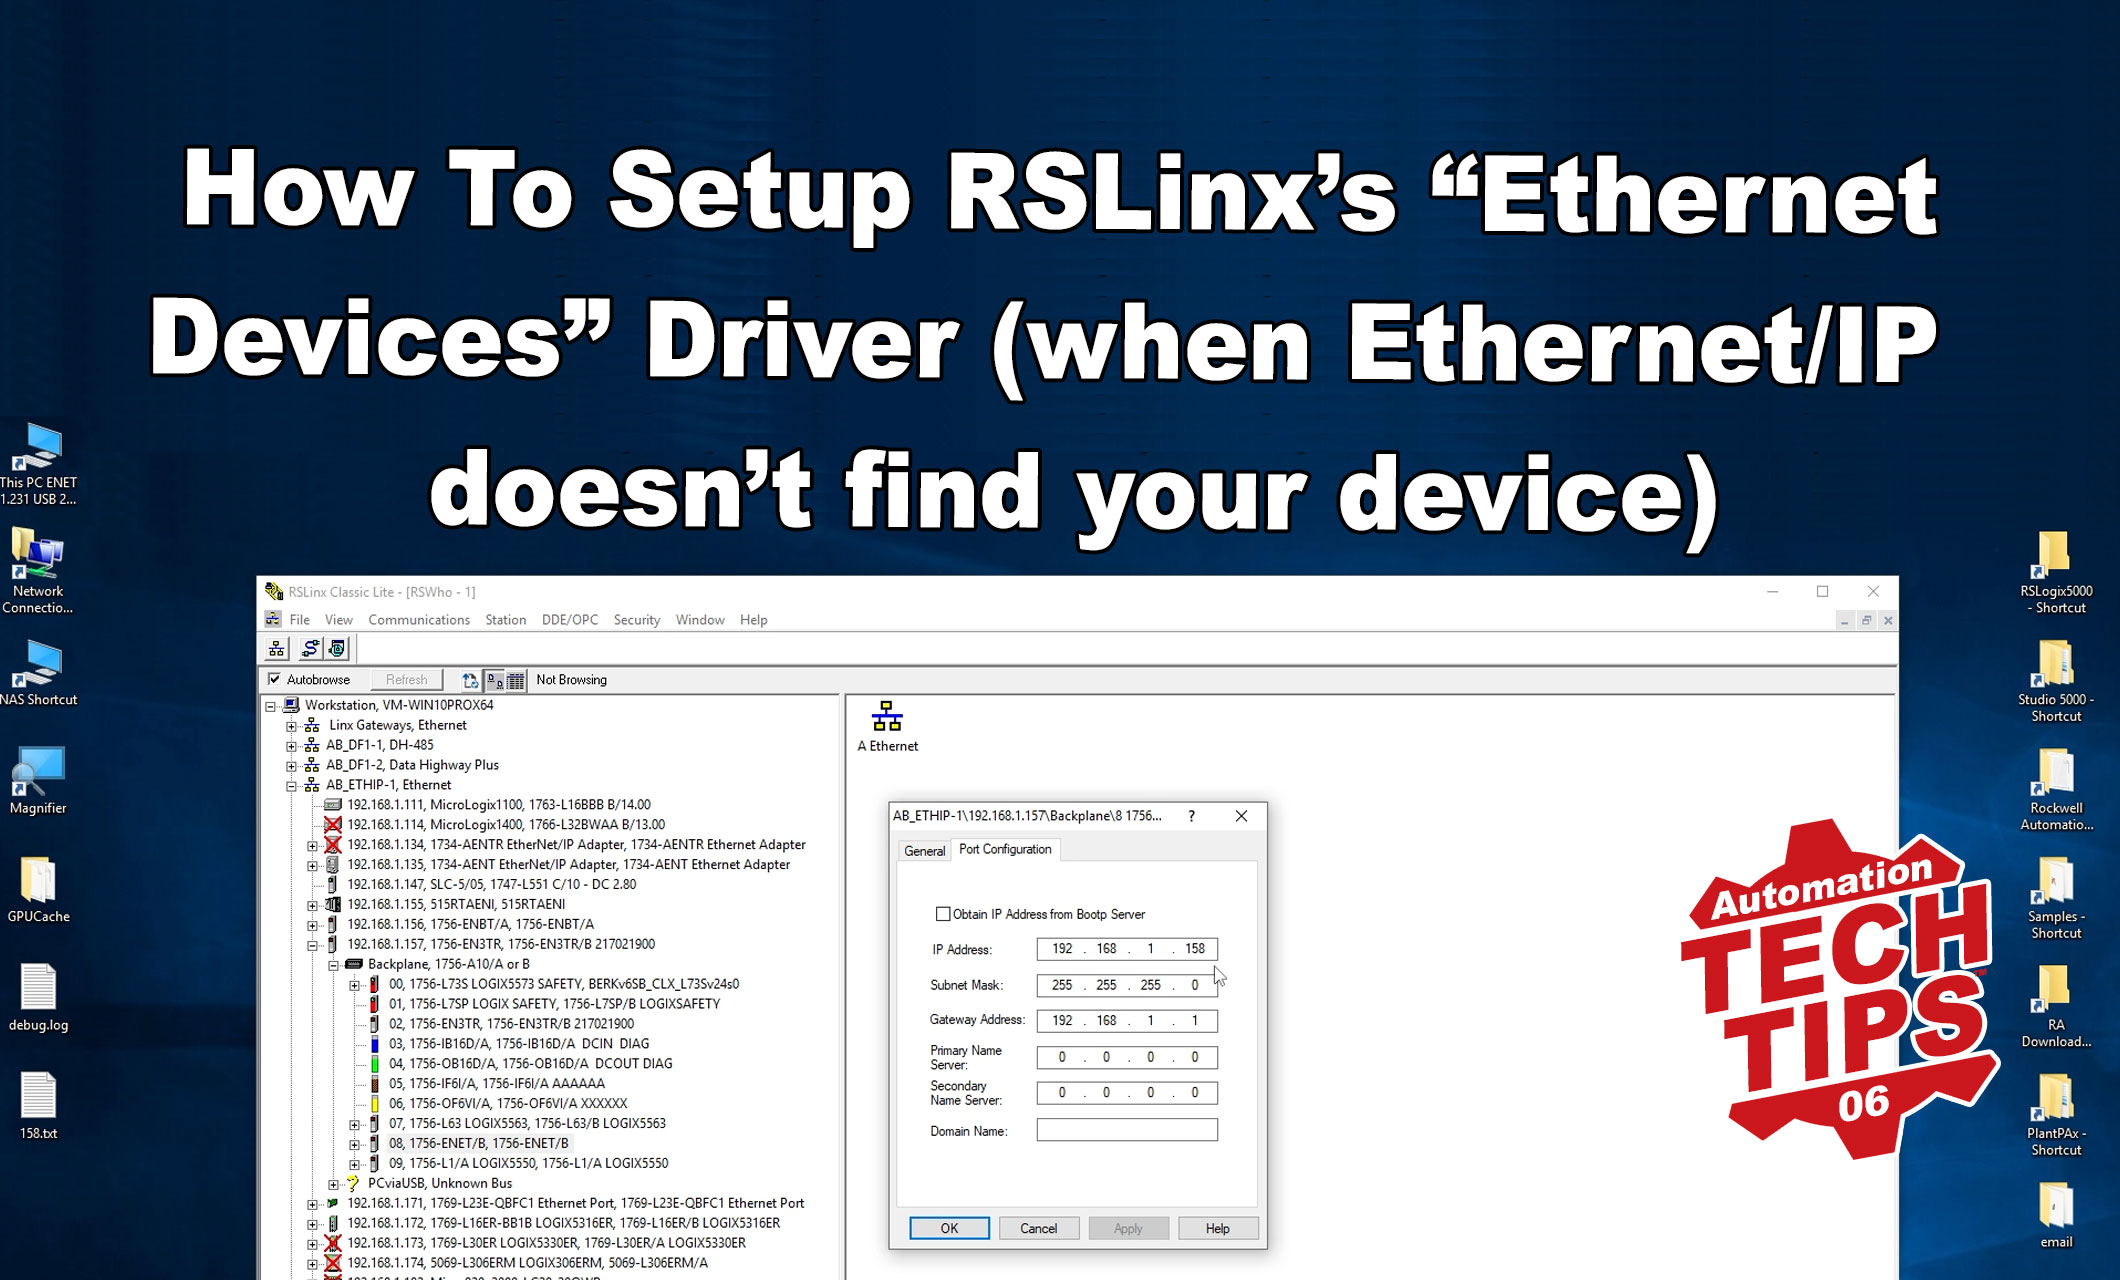 RSLinx - What To Do When The Ethernet/IP Driver Won't Find Your Device (T006)